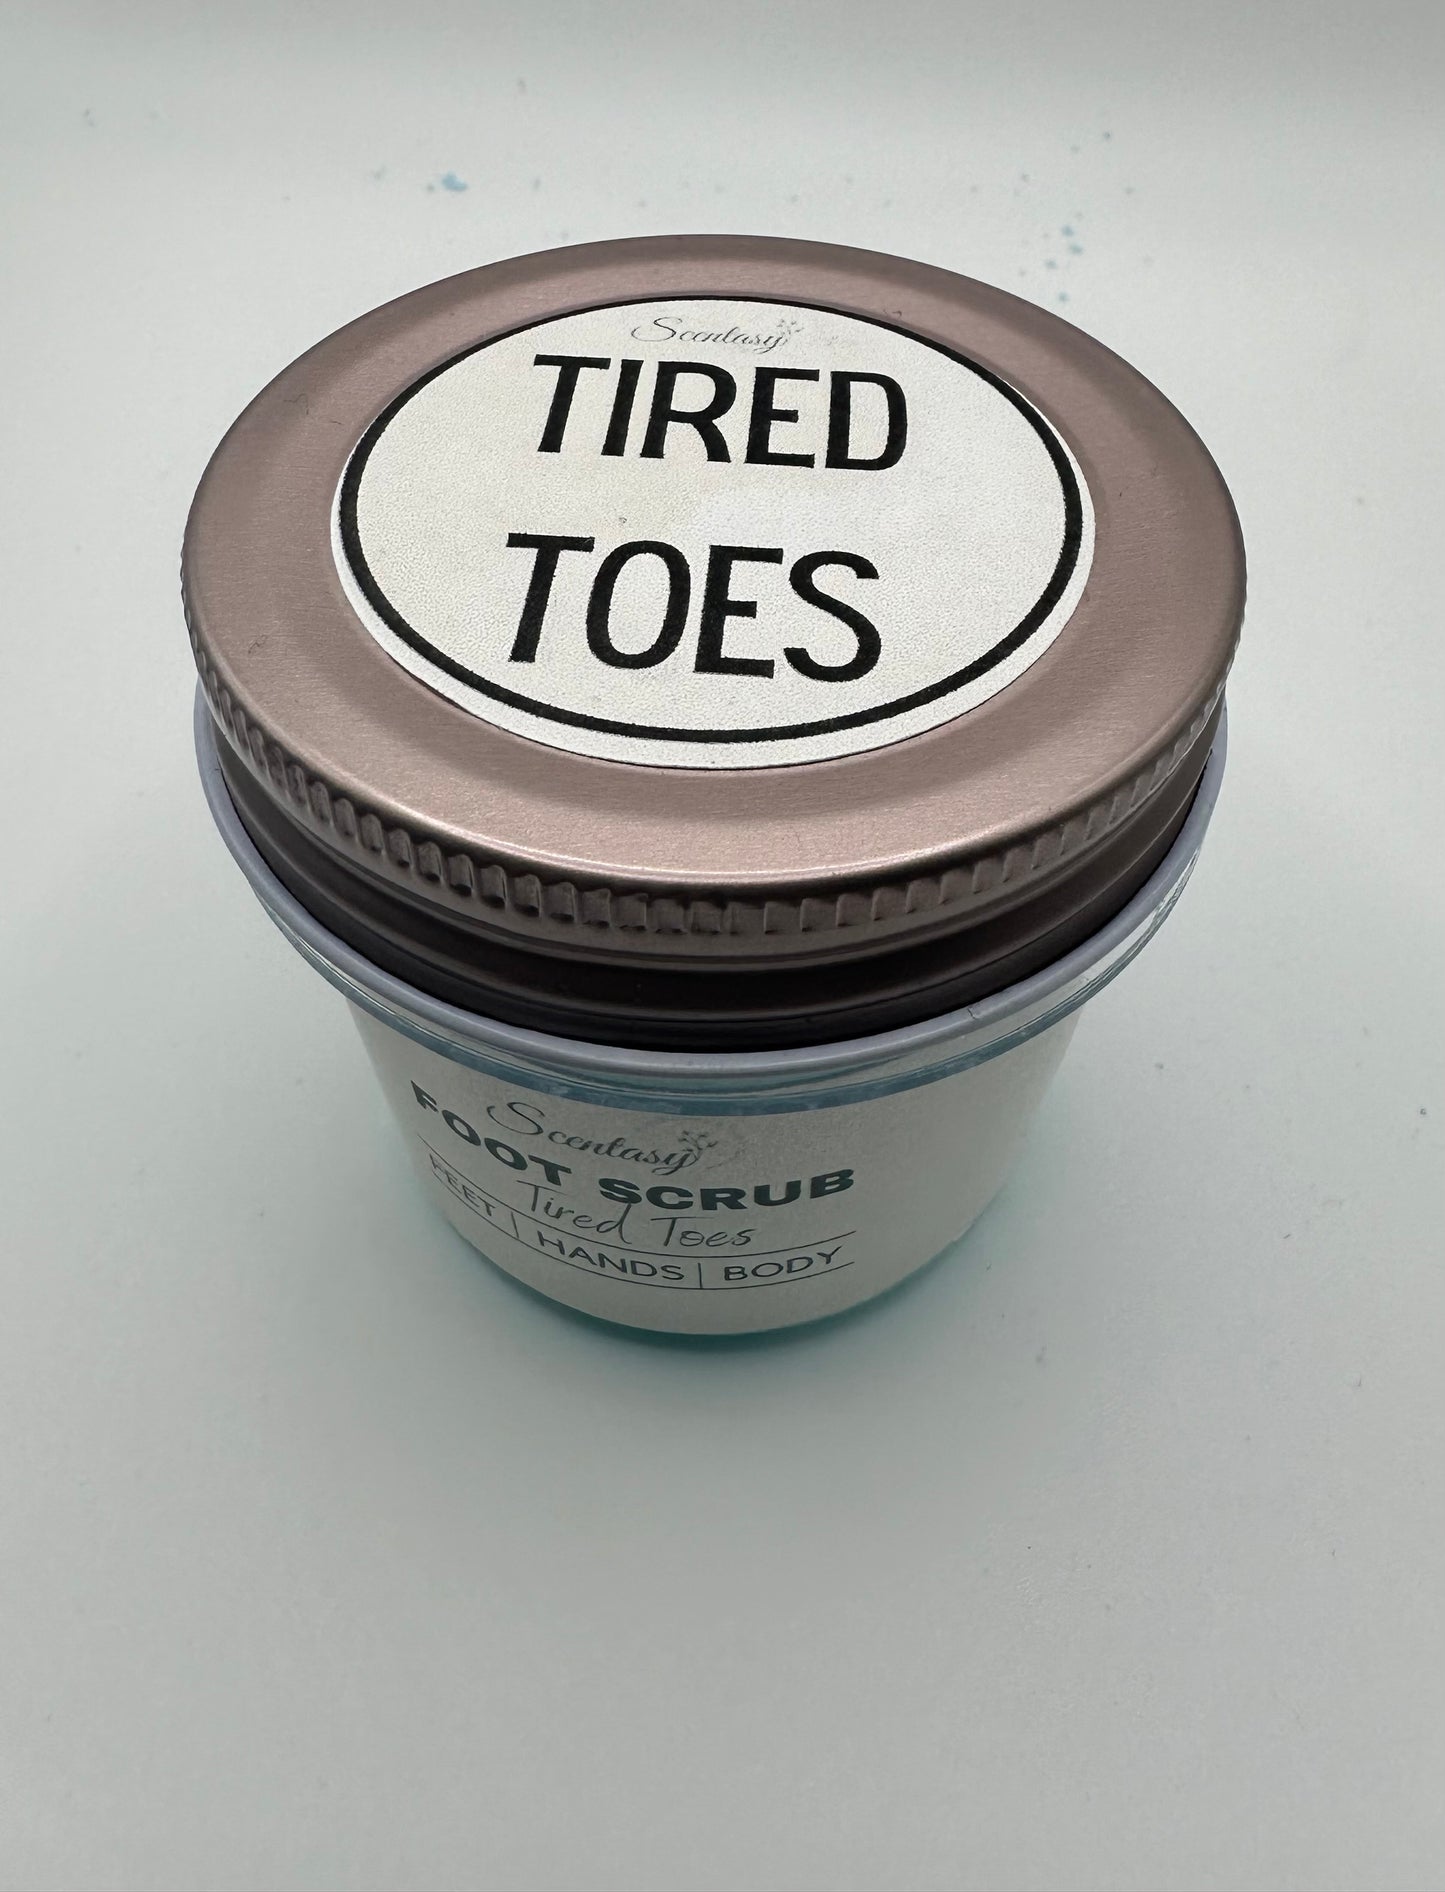 Tired Toes Foot Scrub